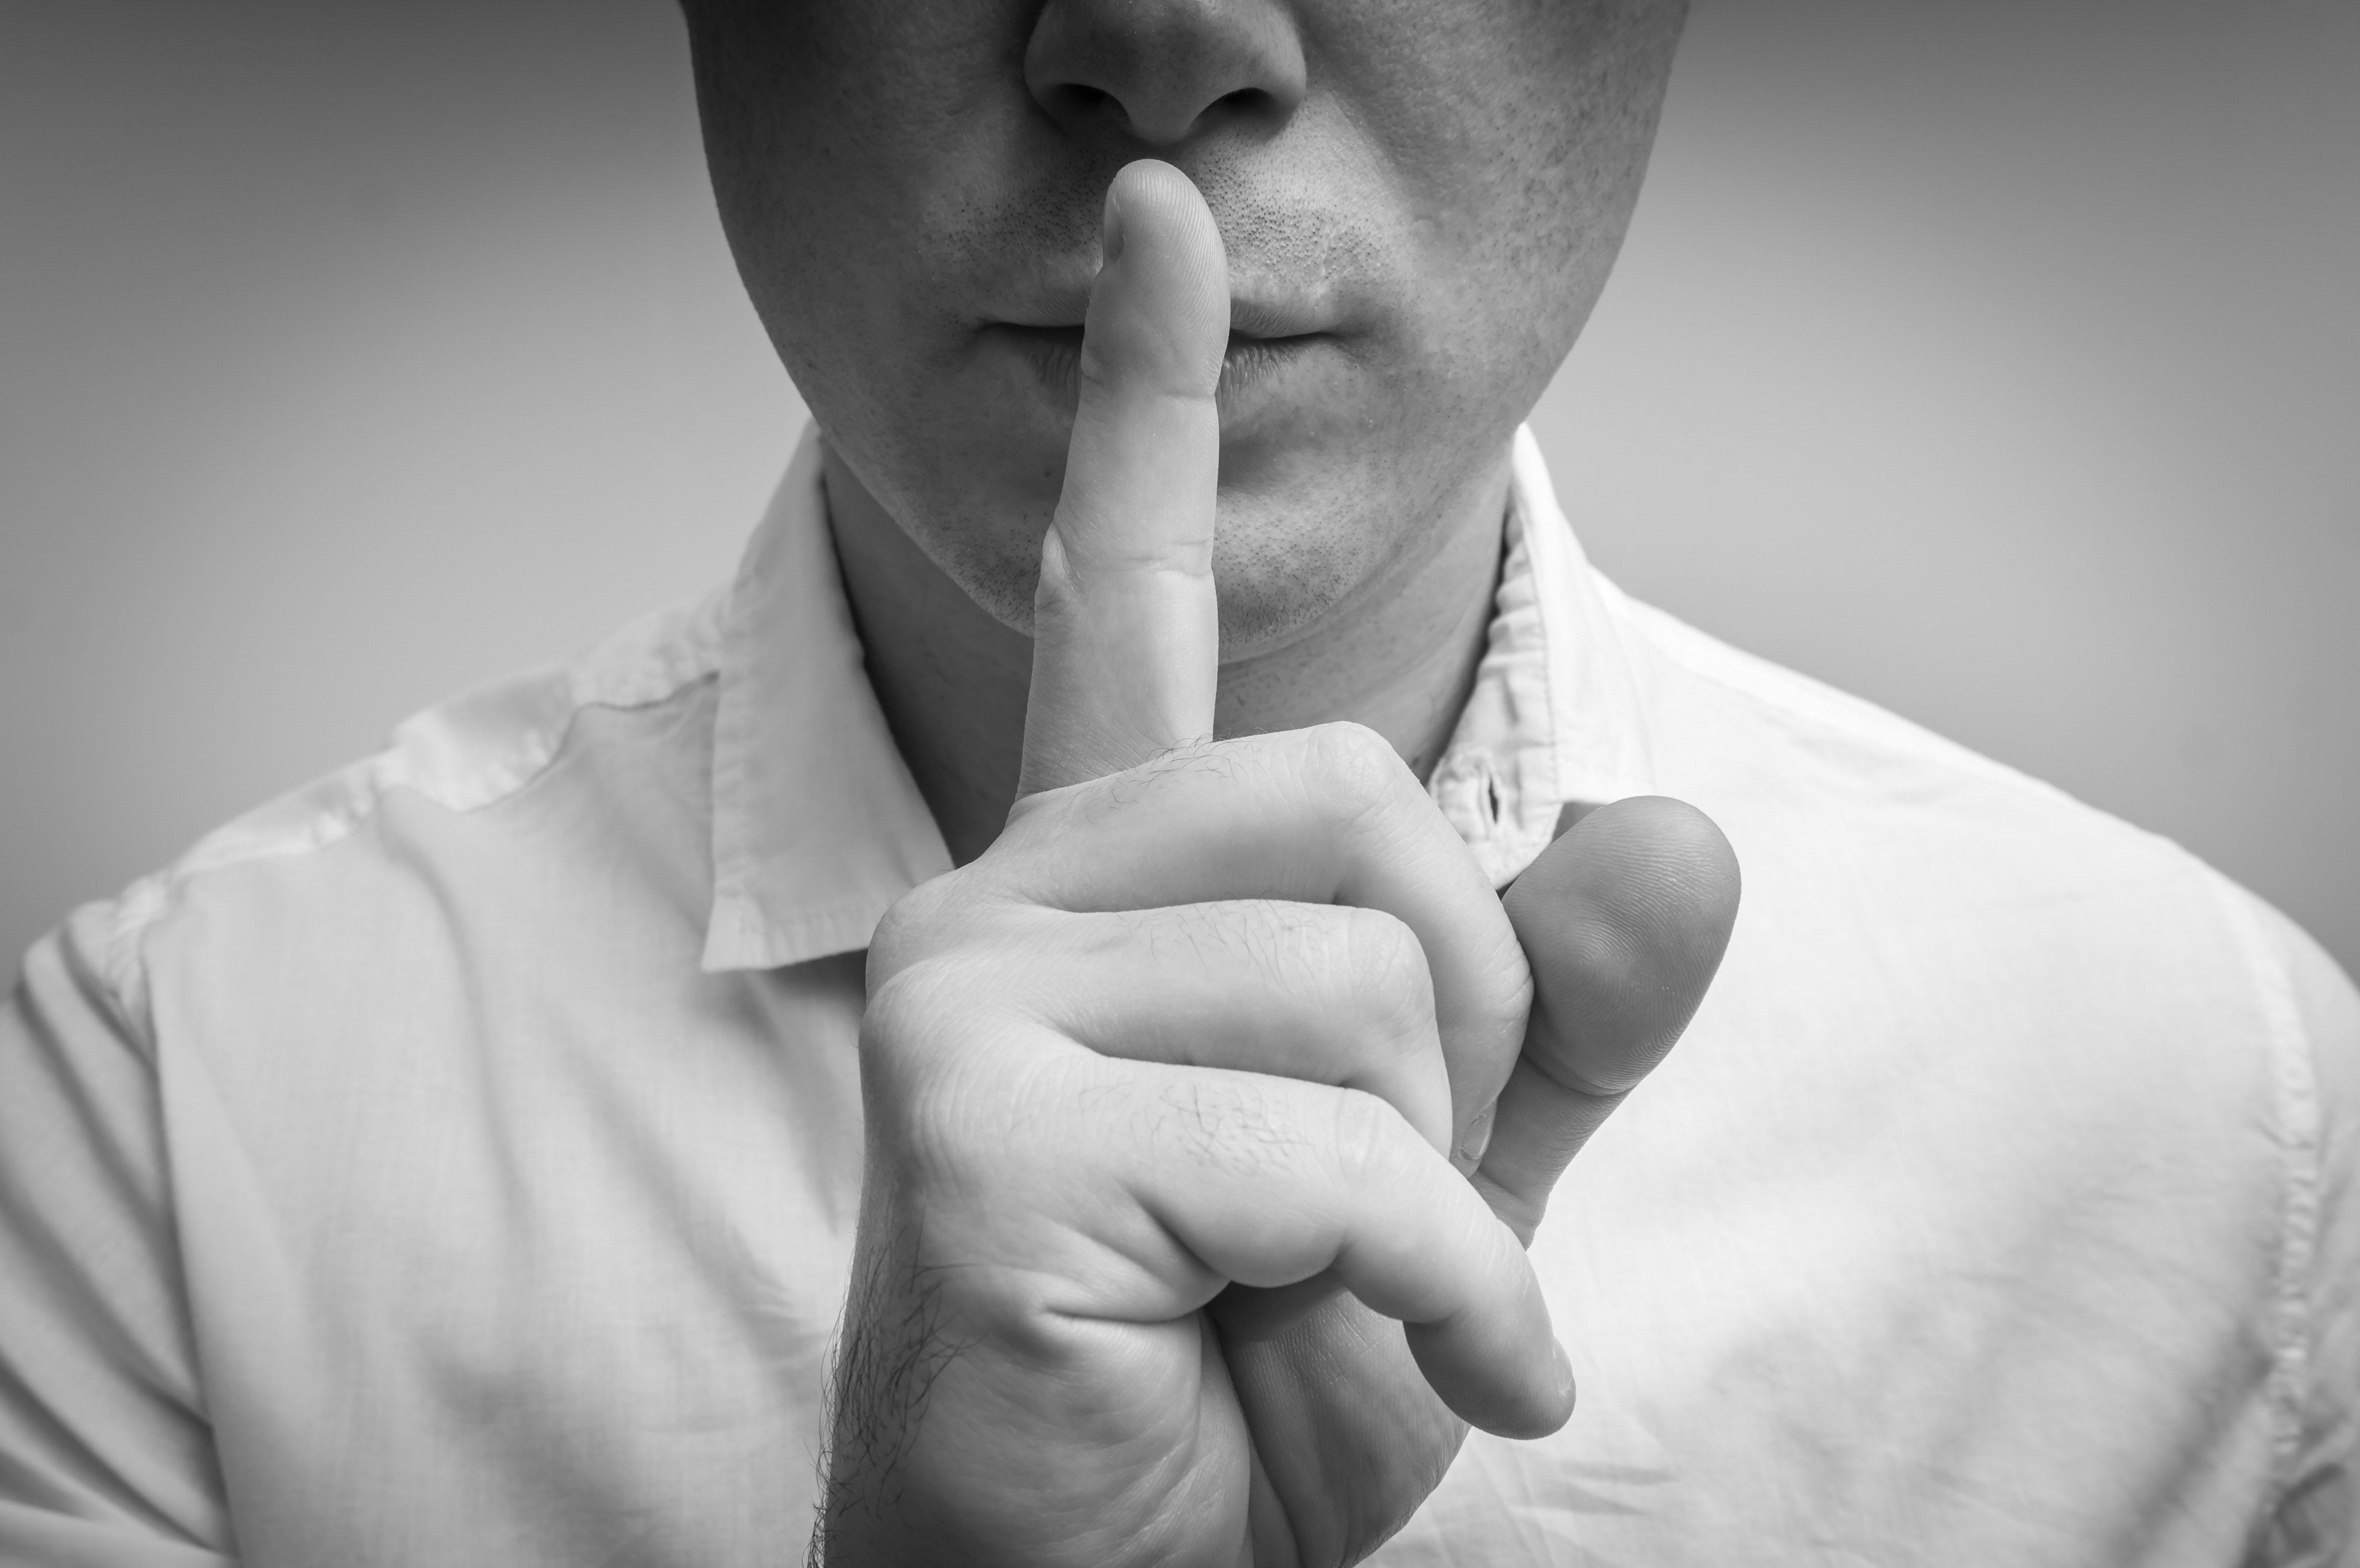 A man with his finger on his lips | Source: Shutterstock